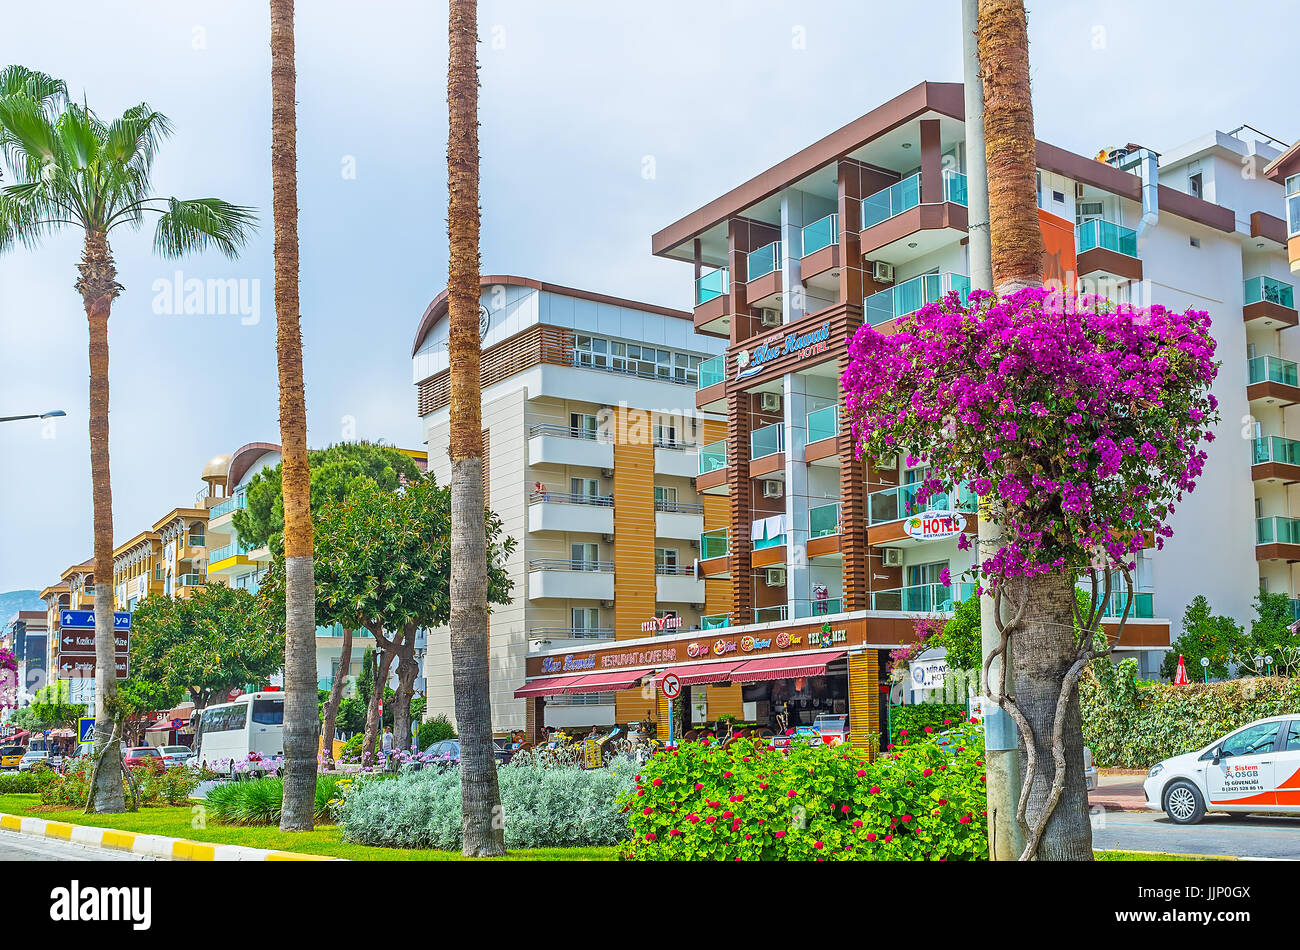 ALANYA, TURKEY - MAY 9, 2017: The row of luxury hotels in Ataturk Boulevard, decorated with tall palms and blooming bougainvillea bushes, on May 9 in  Stock Photo